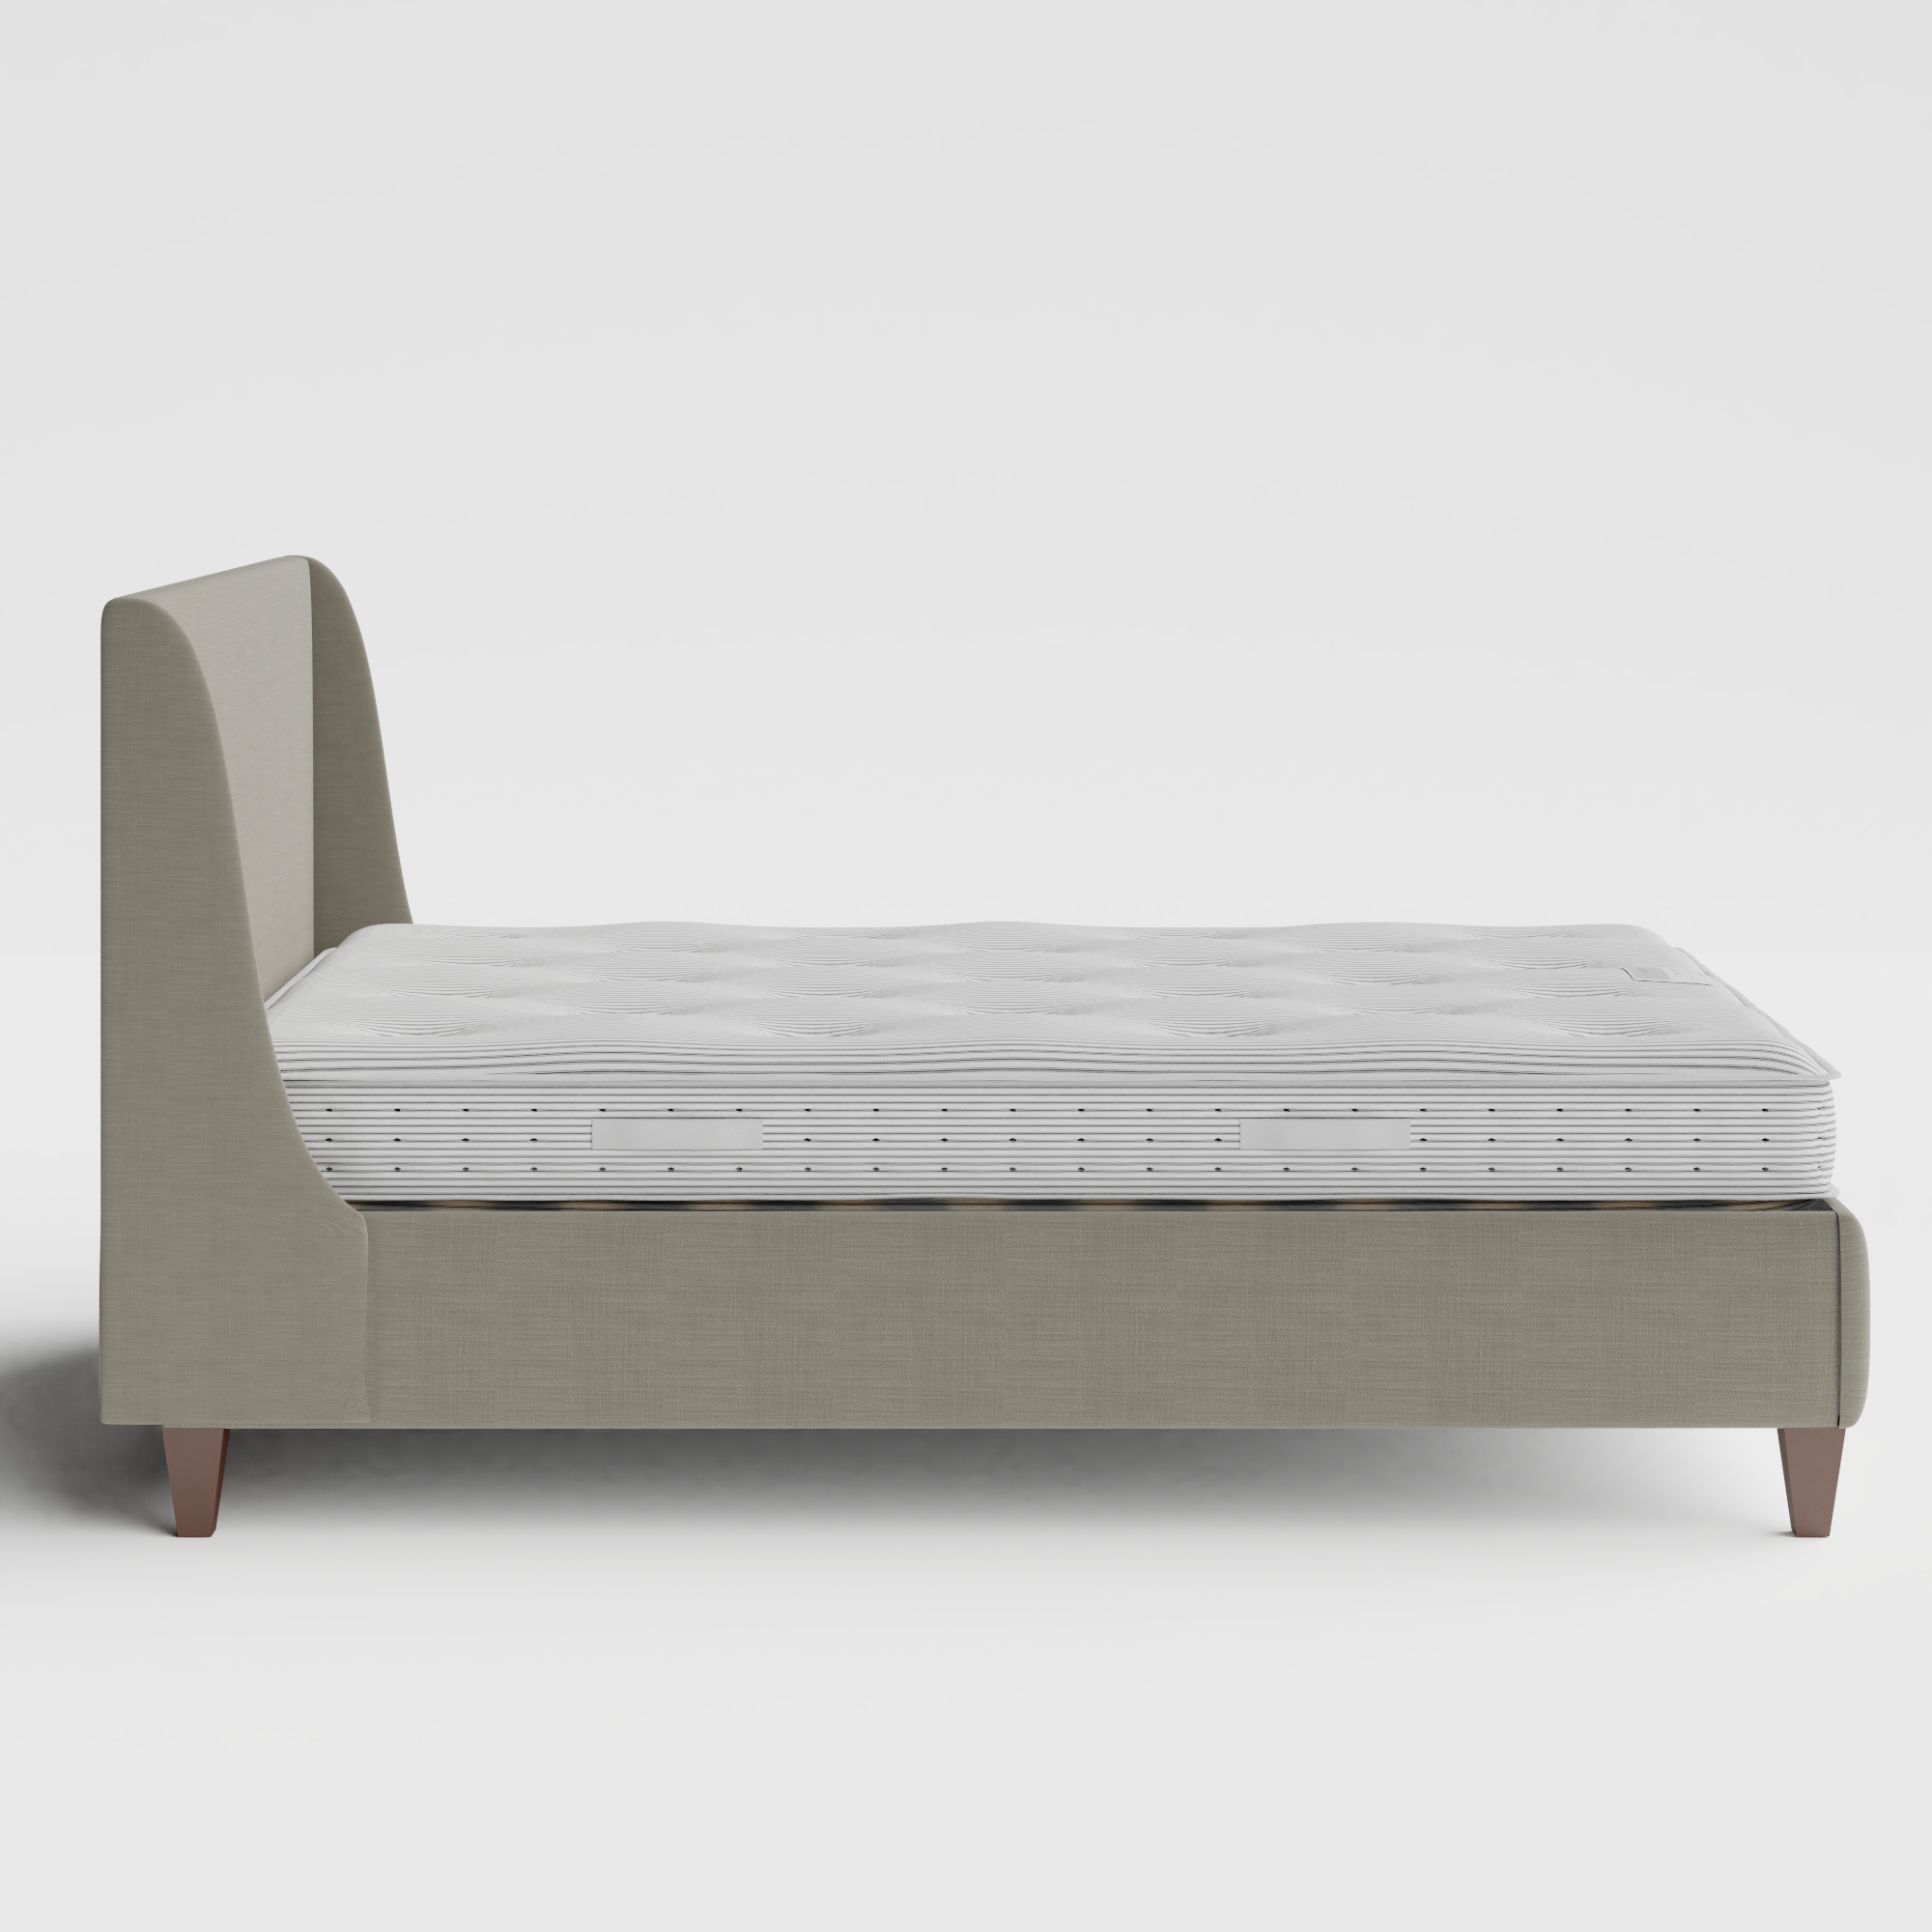 Sunderland upholstered bed in grey fabric with Juno mattress